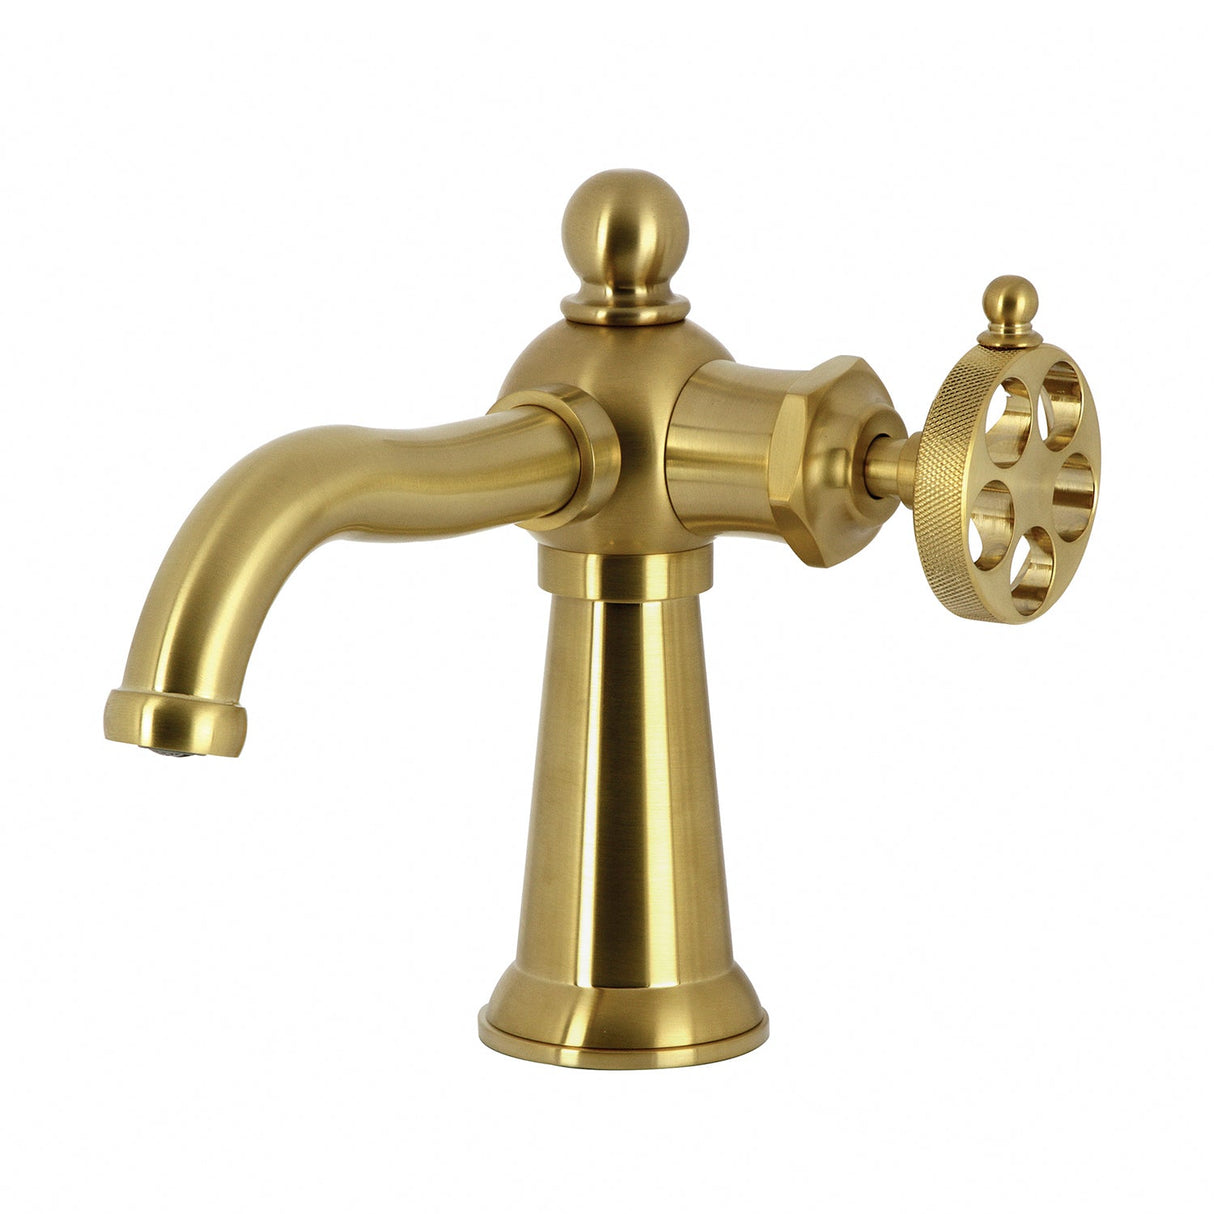 Wendell KS3547RKZ Single-Handle 1-Hole Deck Mount Bathroom Faucet with Knurled Handle and Push Pop-Up Drain, Brushed Brass